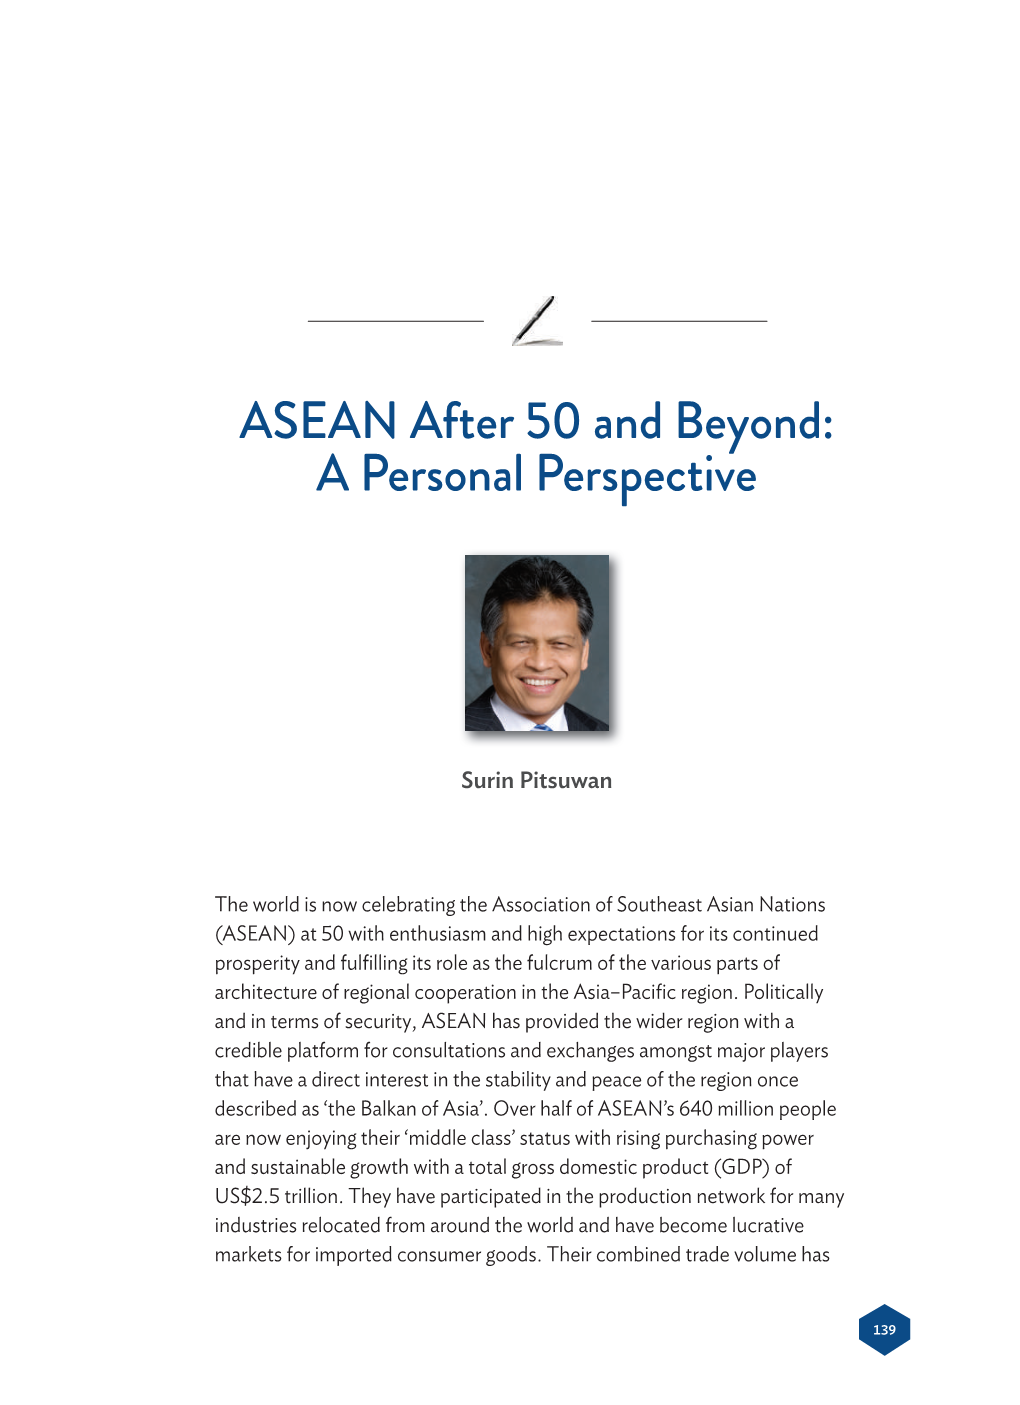 ASEAN After 50 and Beyond: a Personal Perspective